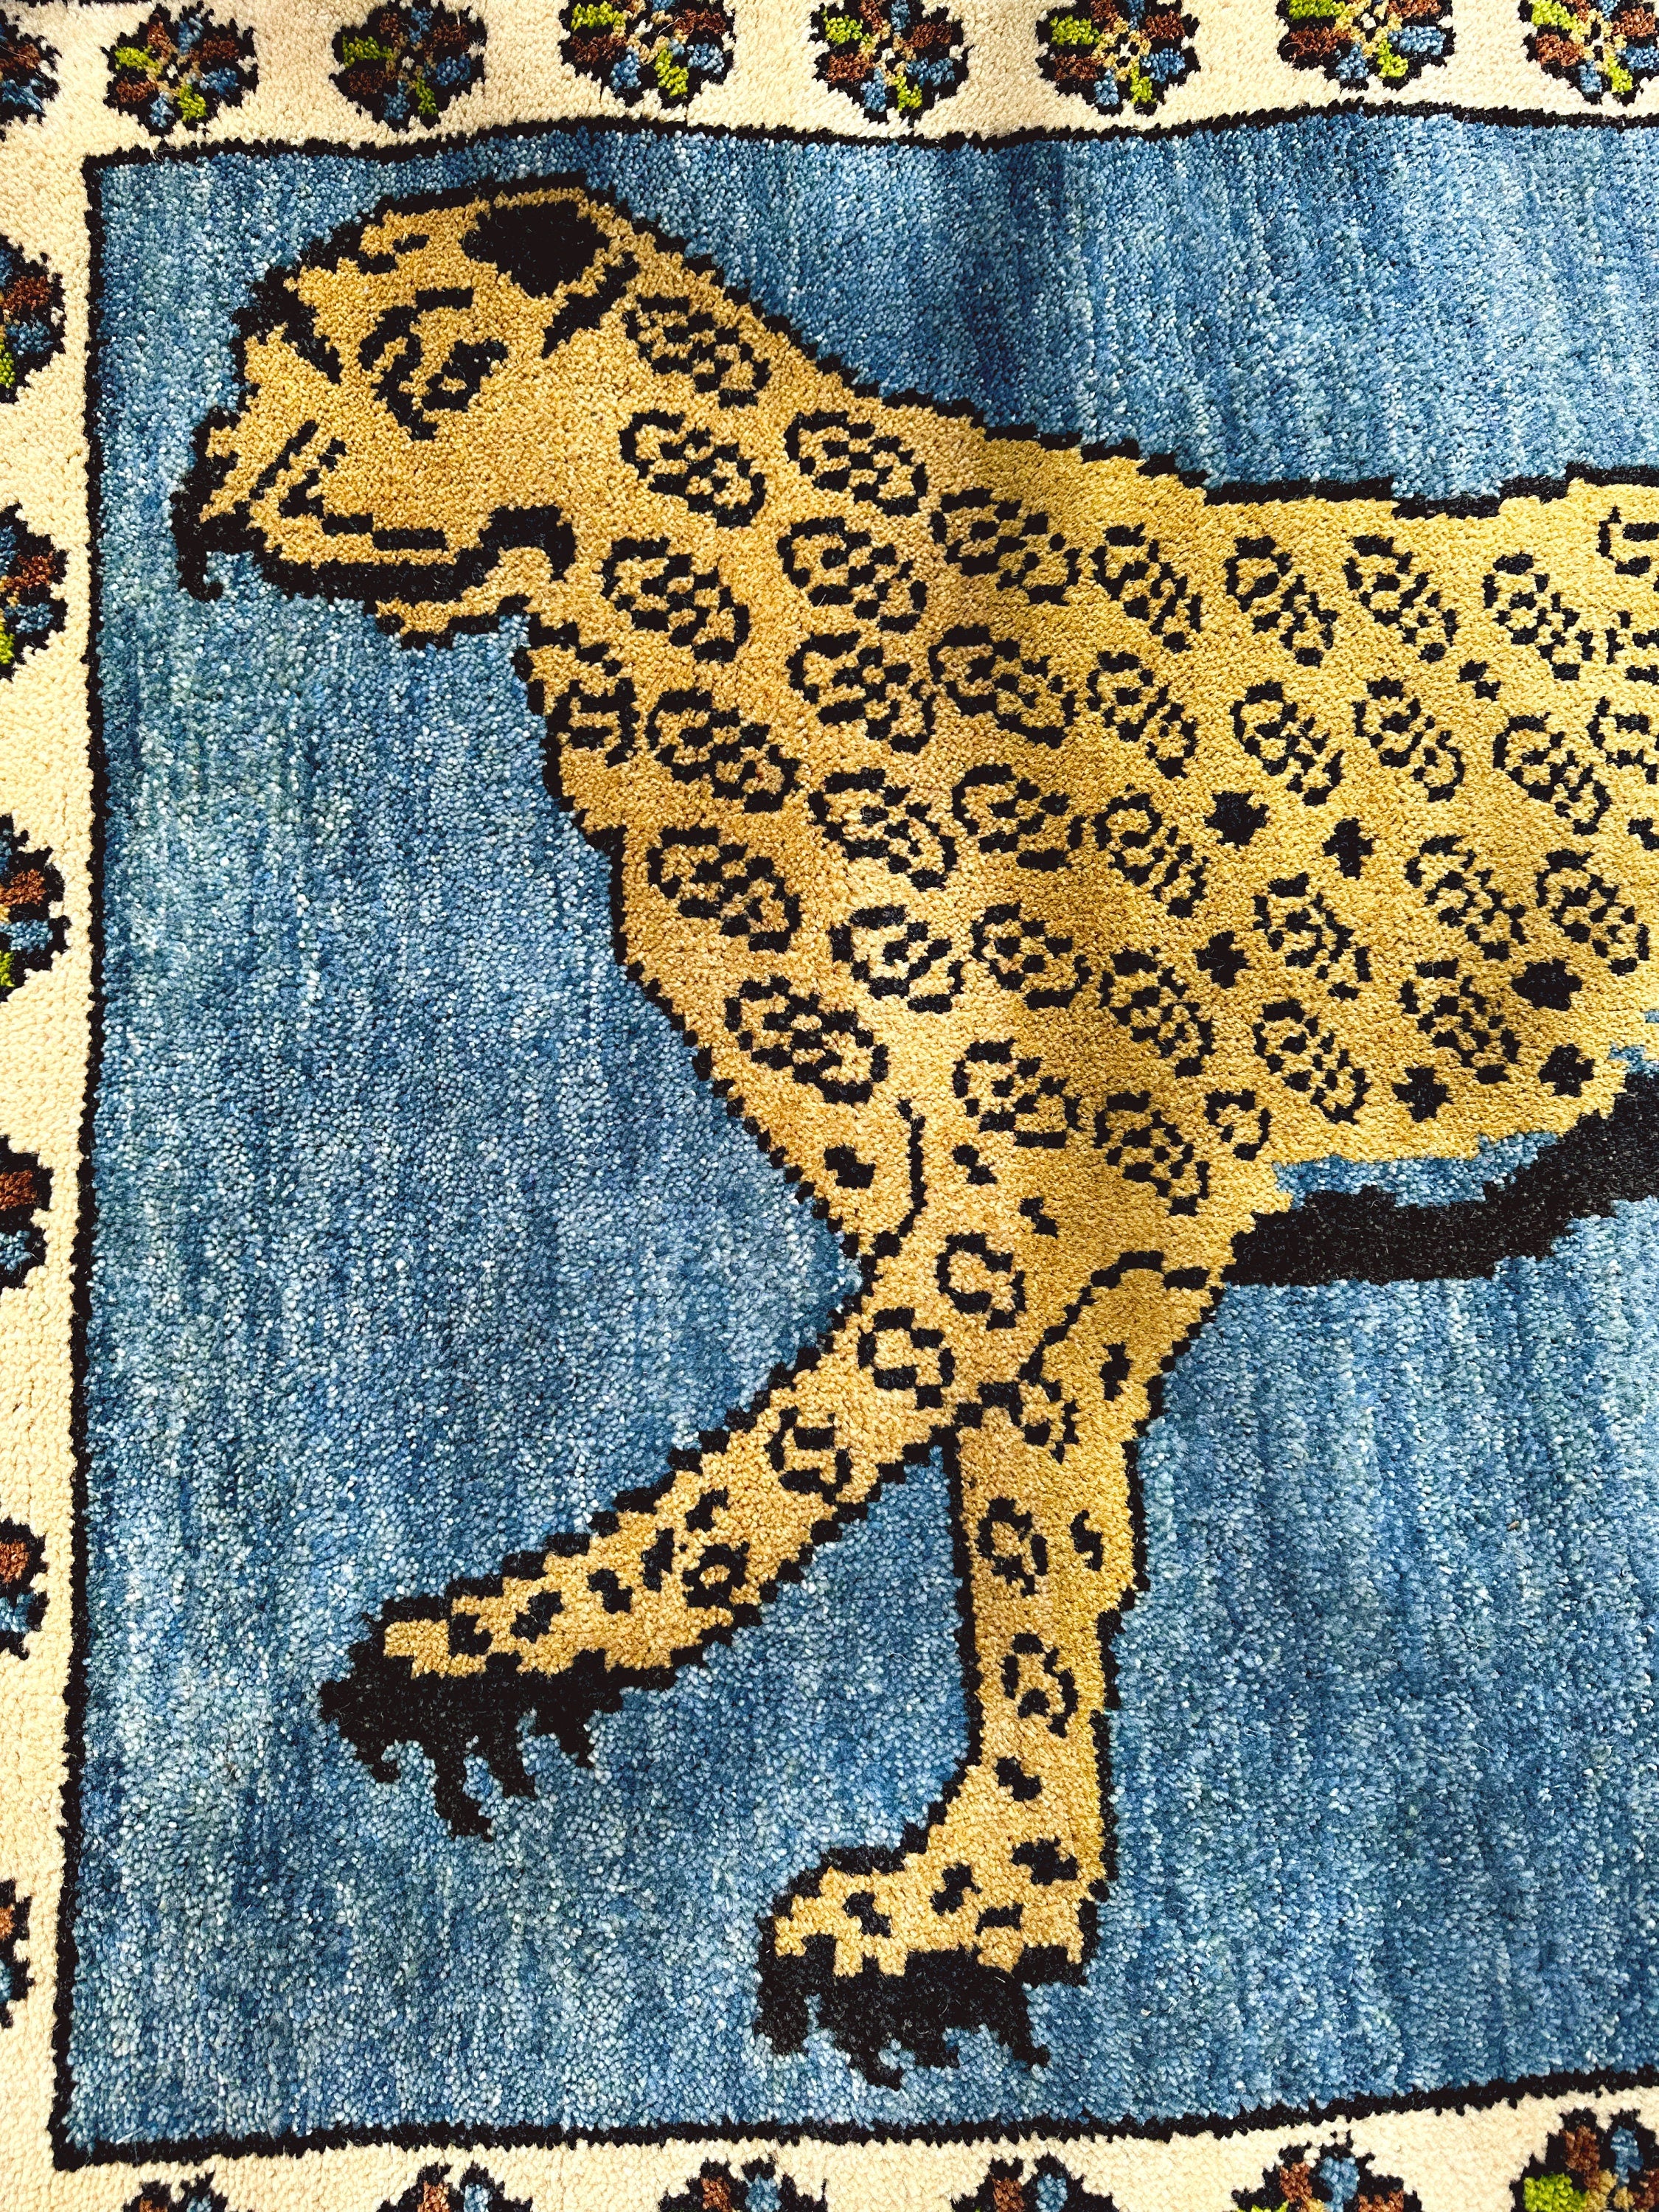 Hand Woven Persian Leopard Gabbeh Rug in Cobalt Blue 3x5 ft | Fine Wool Area Rug | Unique Boho Chic Multicolor Geometric Pattern